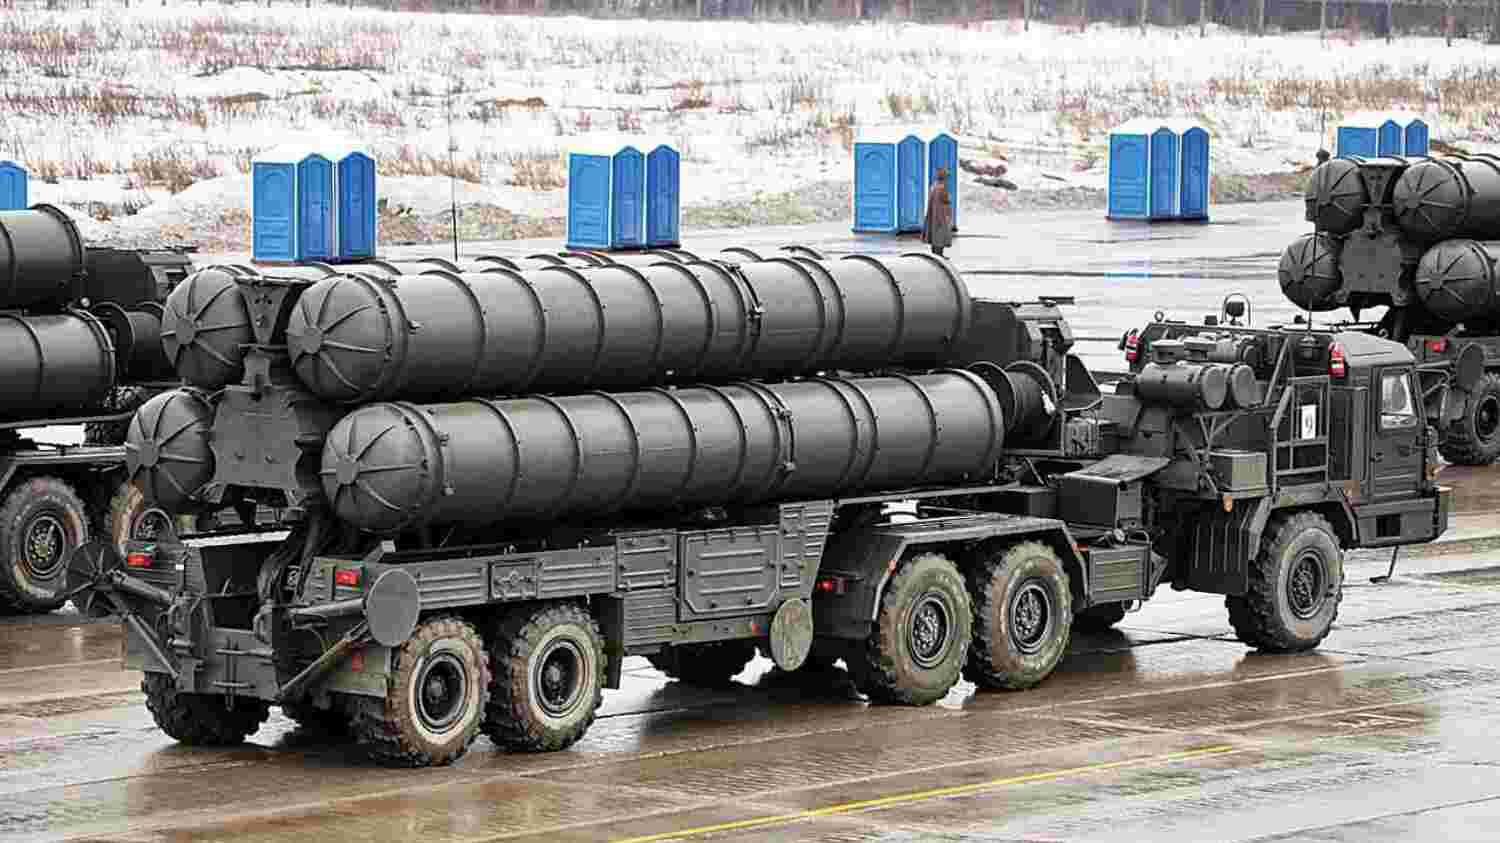 Russia, India committed to S-400 missile deal: Russian envoy